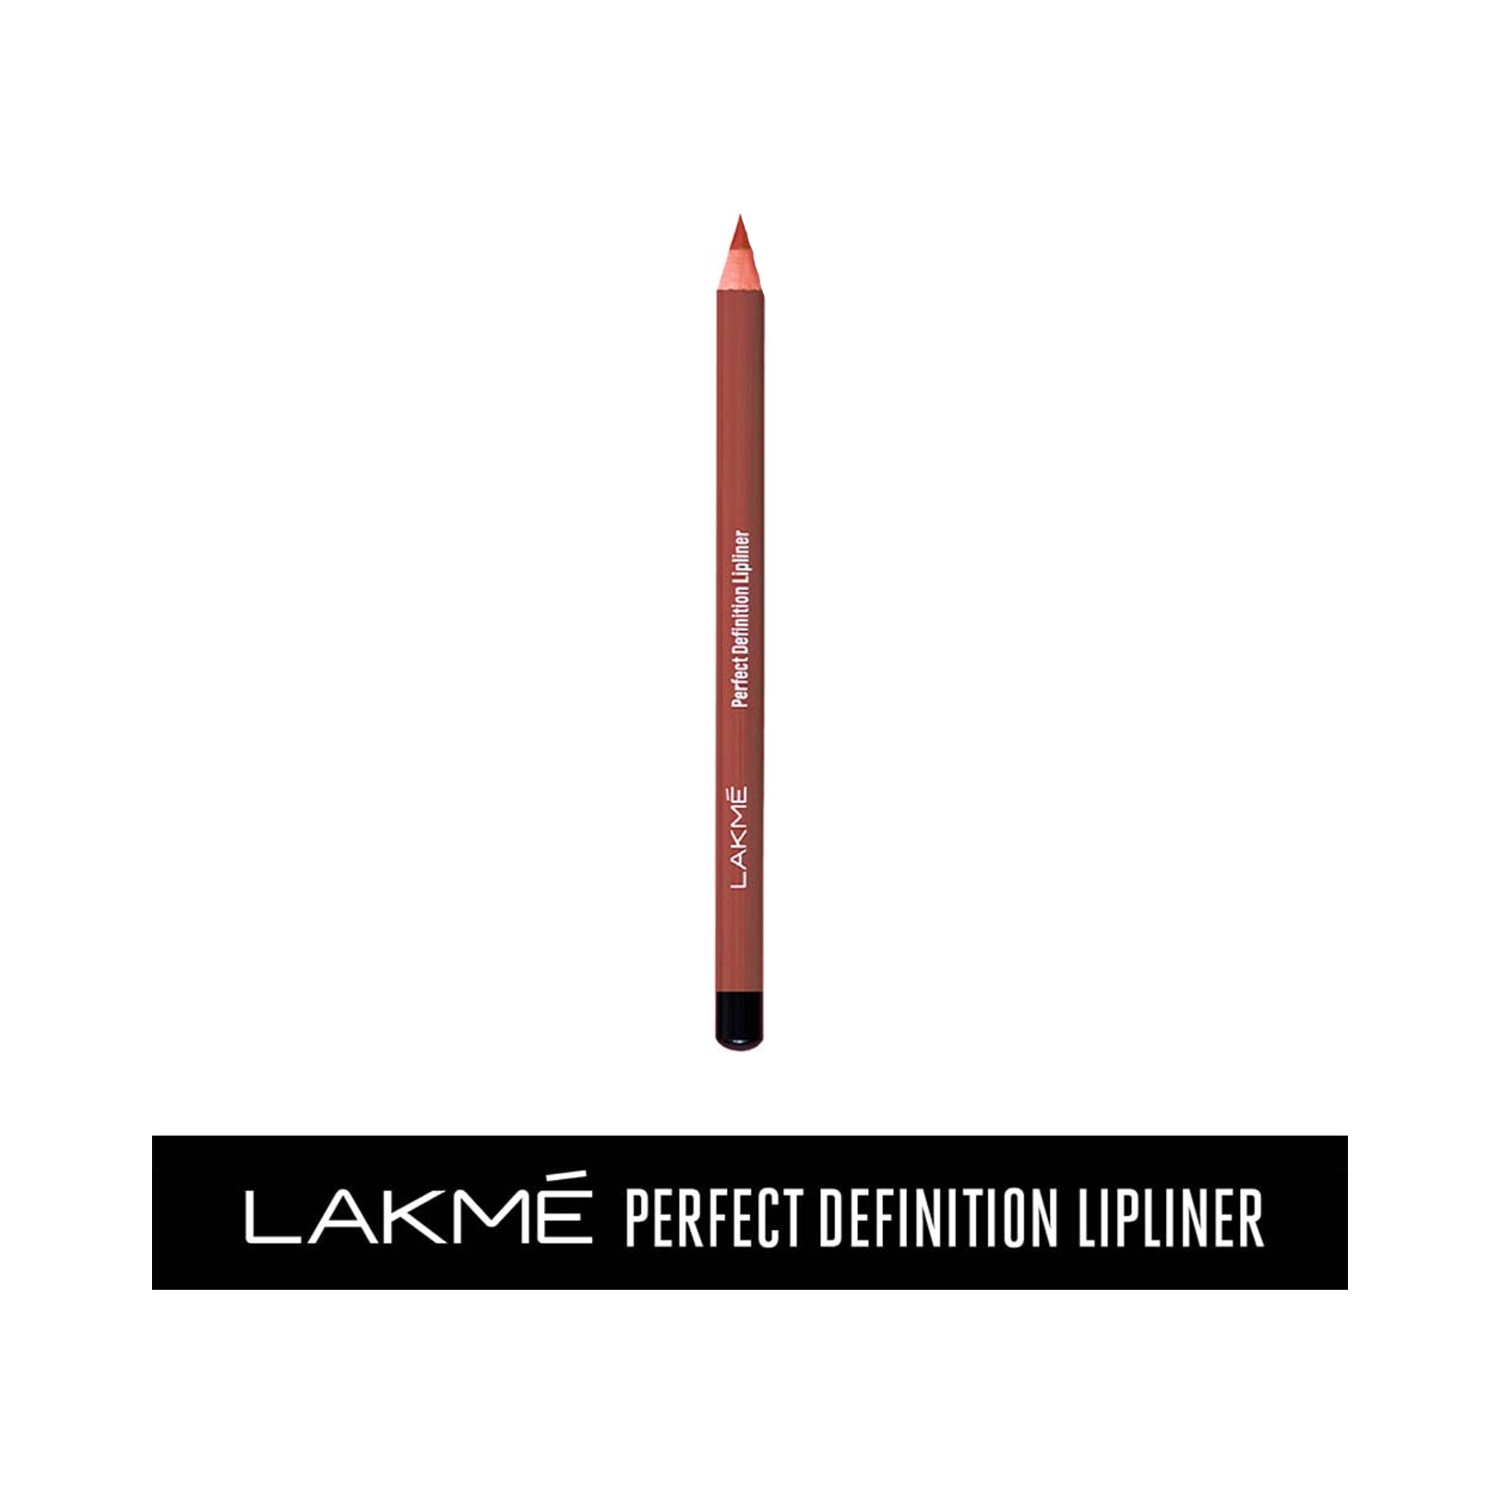 Lakme | Lakme Perfect Definition Lip Liner - Rosewood Forest (0.78g)